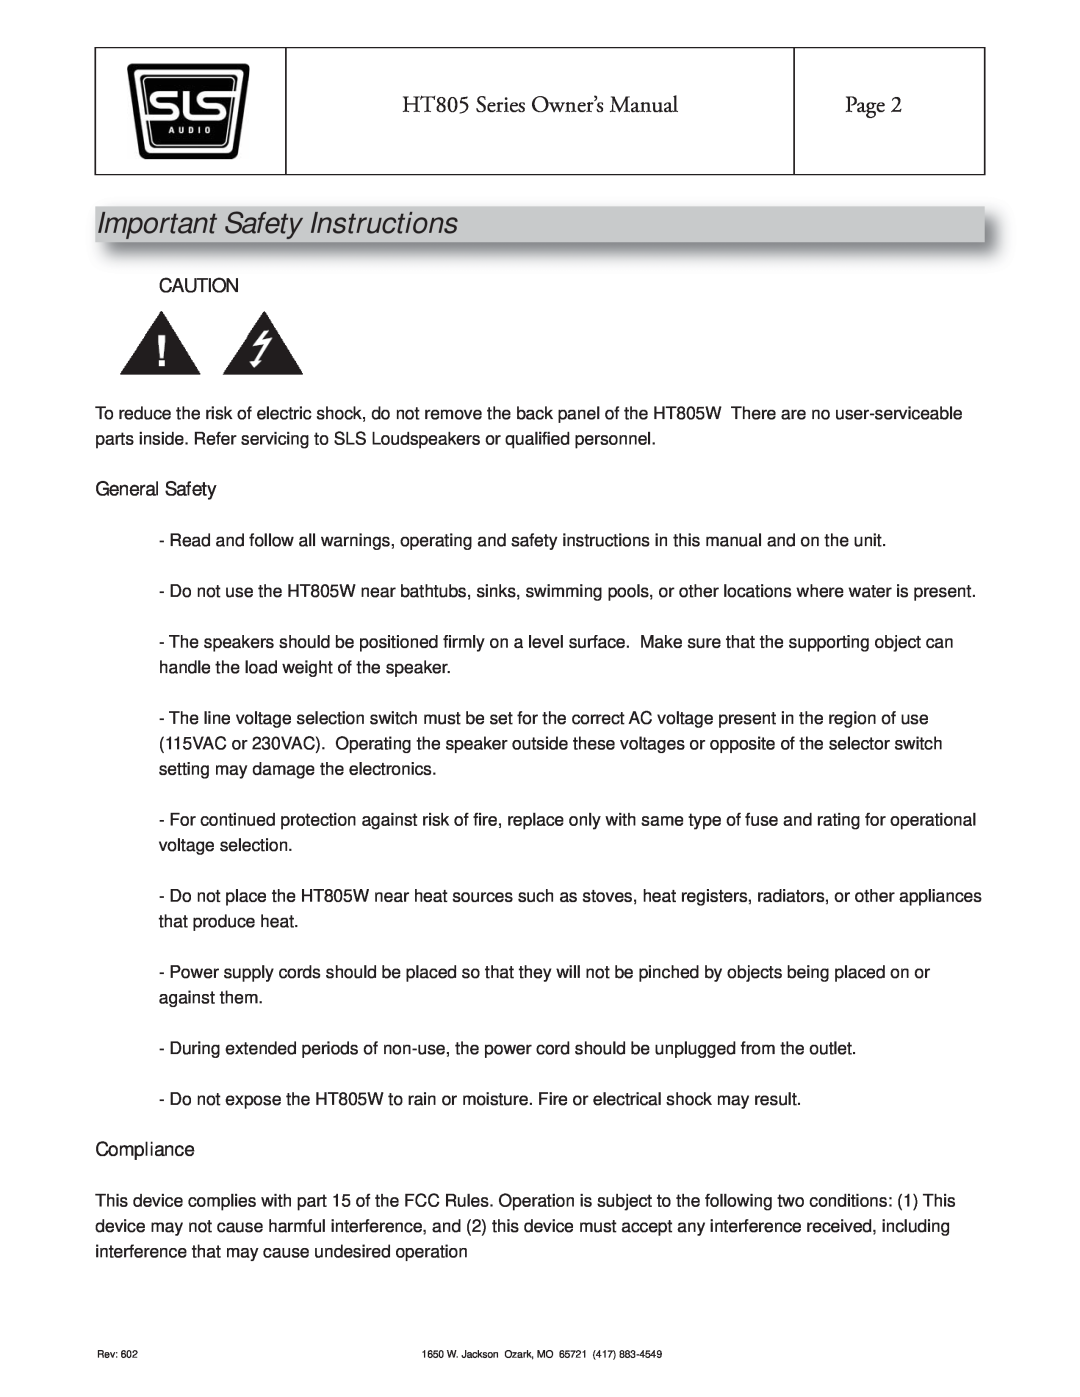 SLS Audio HT805T, HT805S, HT805W, HT805C owner manual Important Safety Instructions, Page 